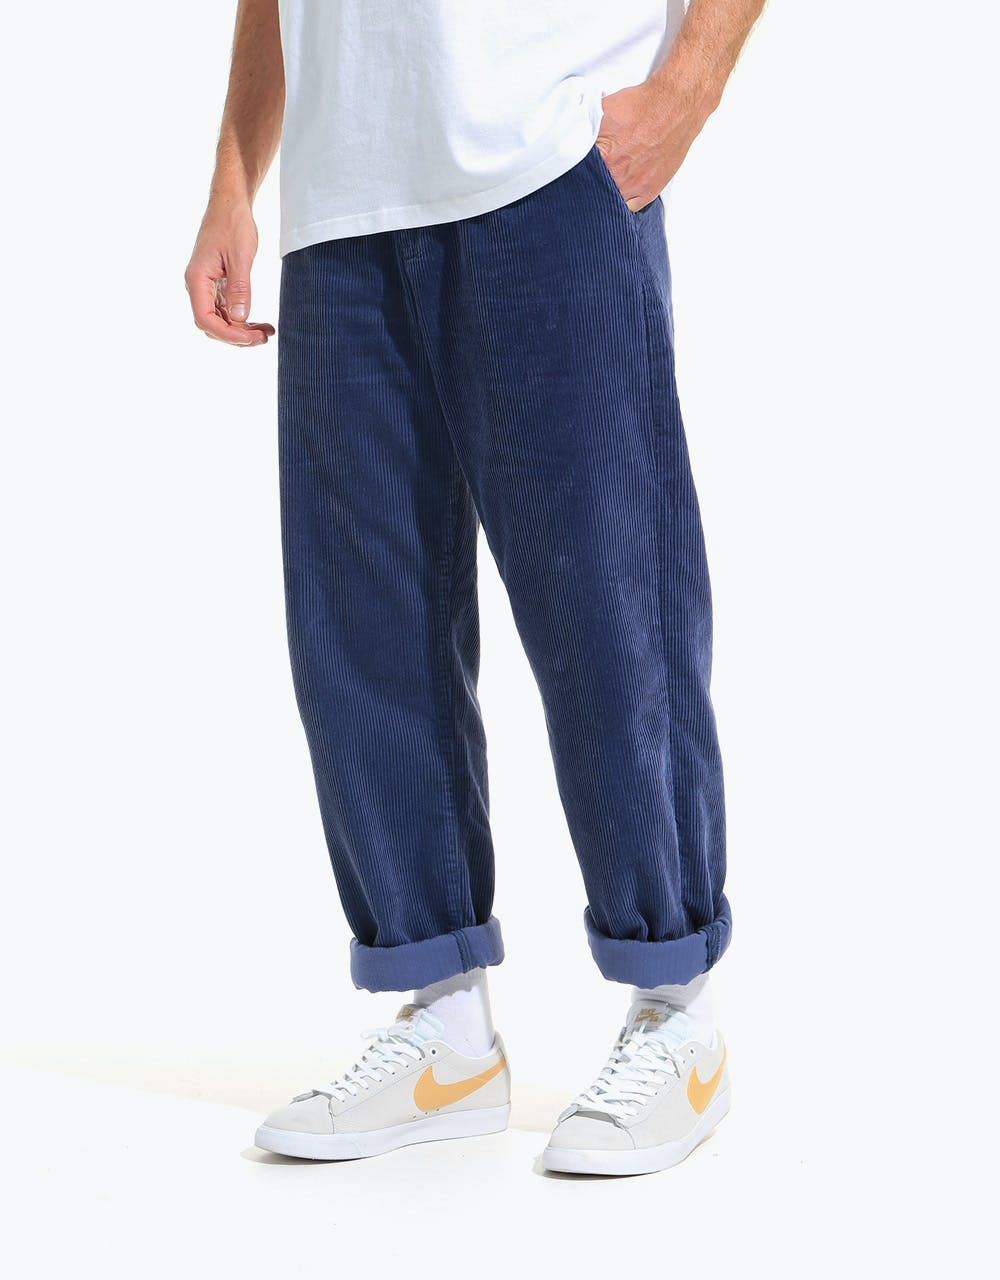 Route One Relaxed Fit Big Wale Cords - Dusk Blue